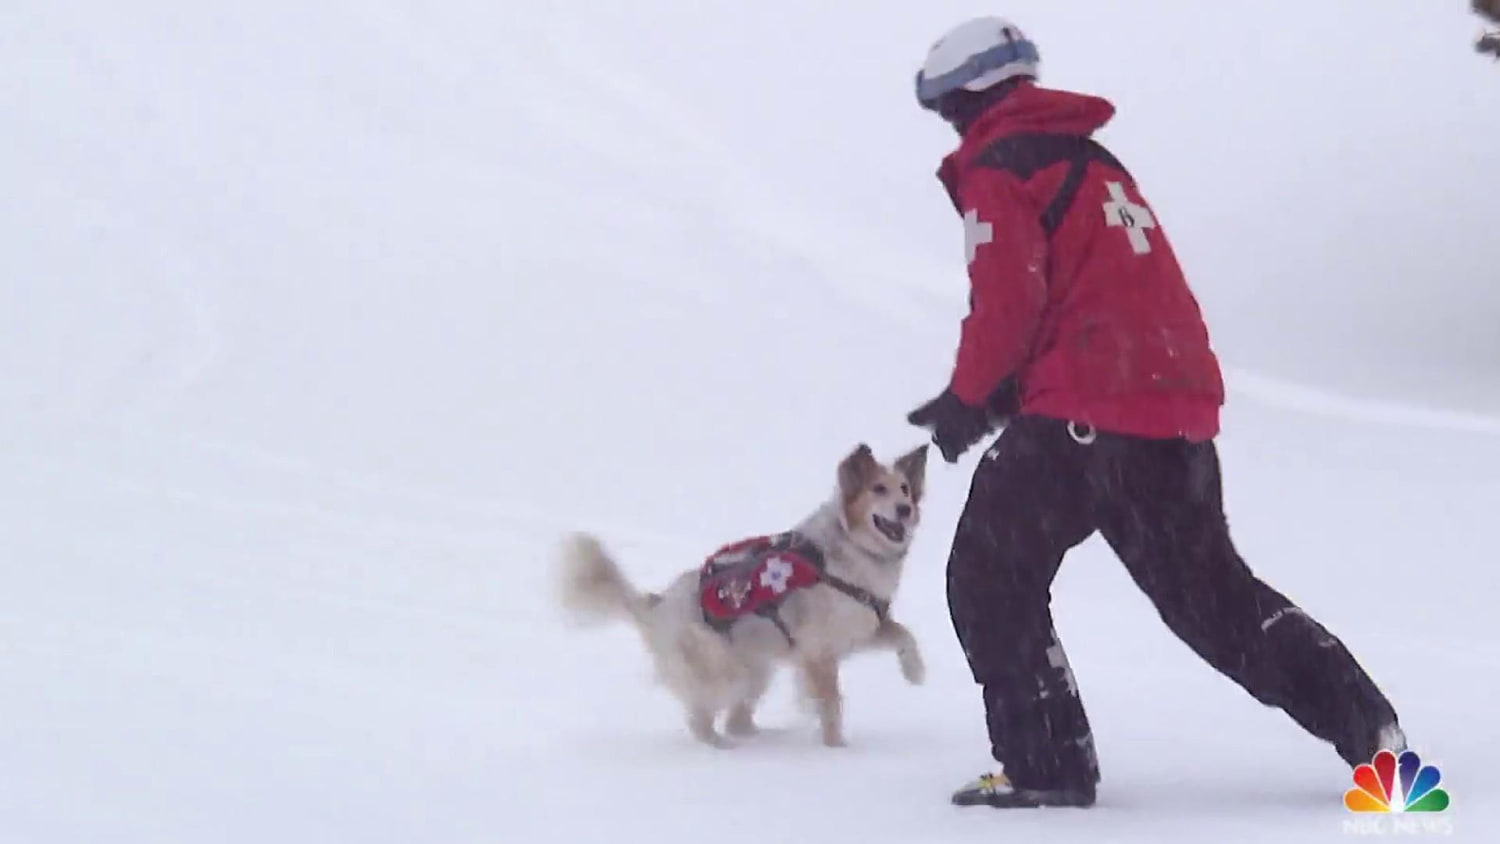 Avalanche Rescue Dogs - Colorado Wilderness Rides and Guides